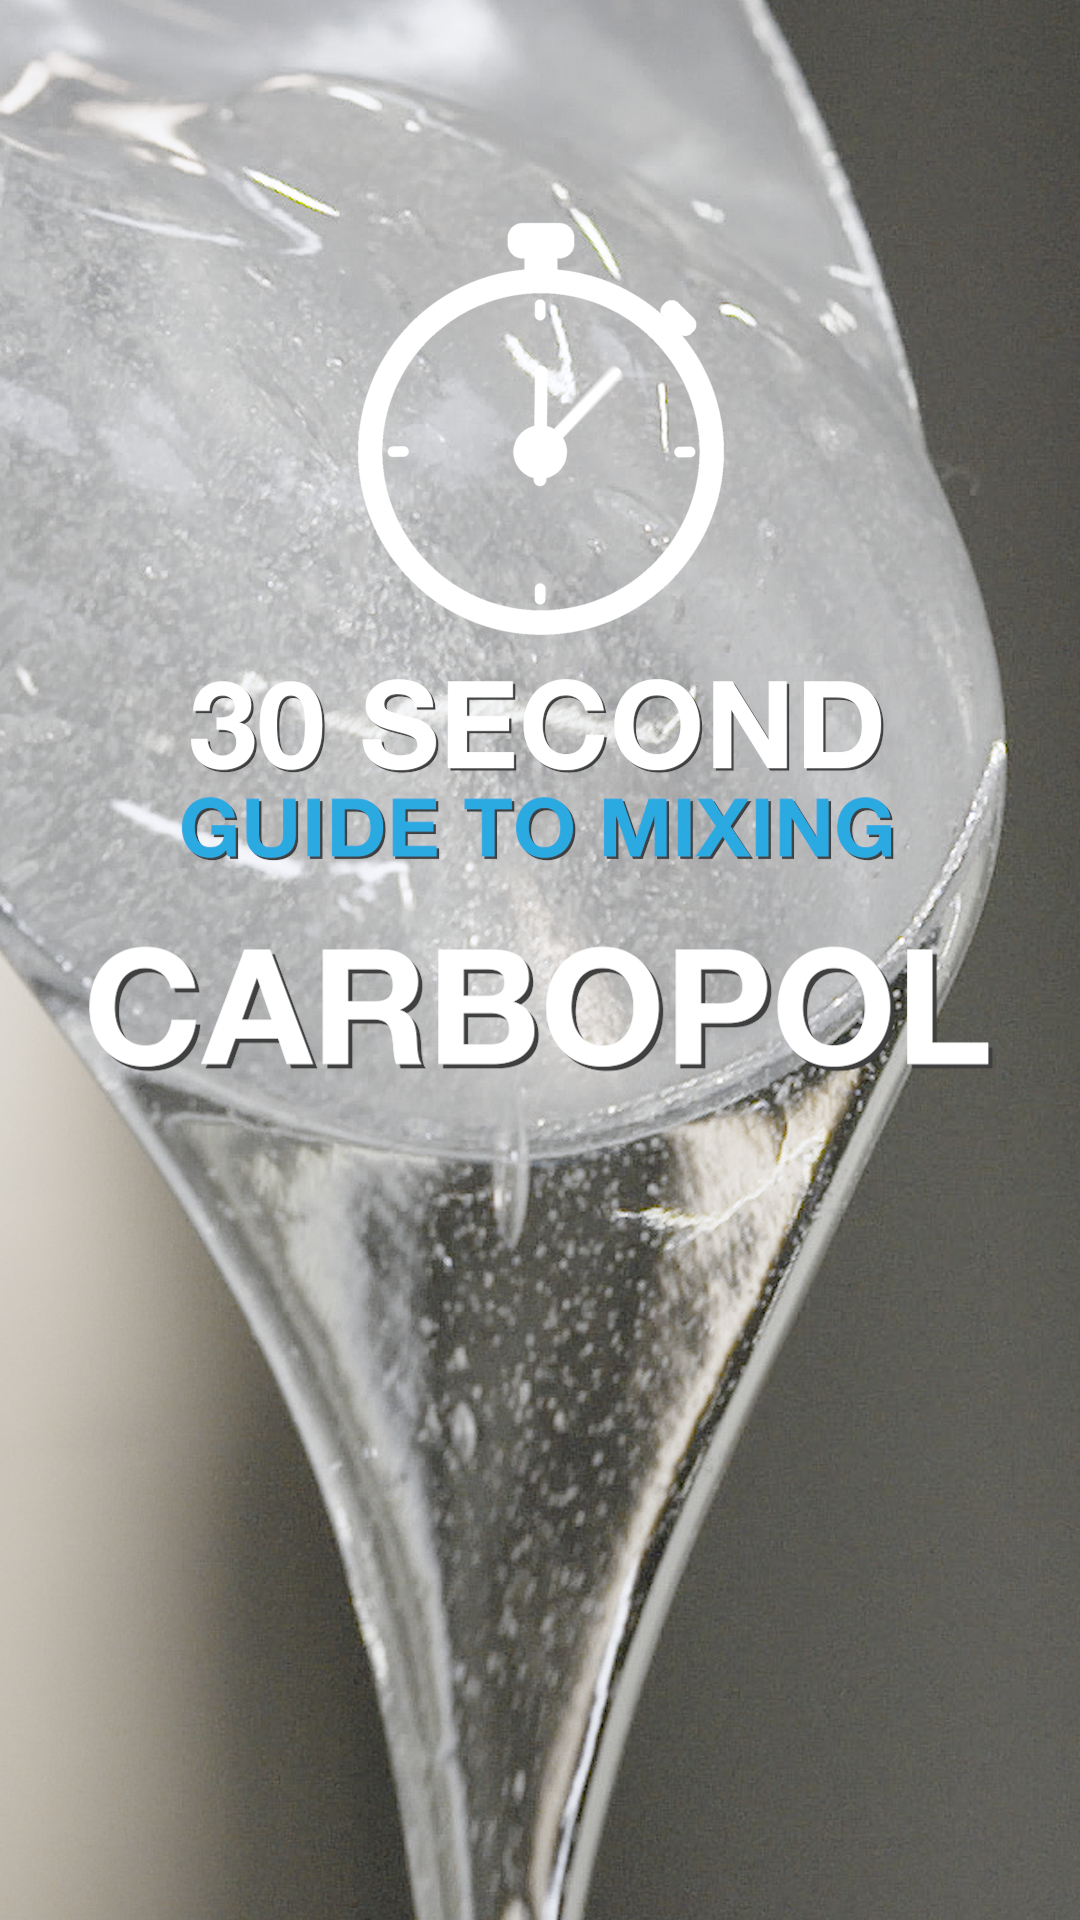 30 Second Guide to Mixing Carbopol